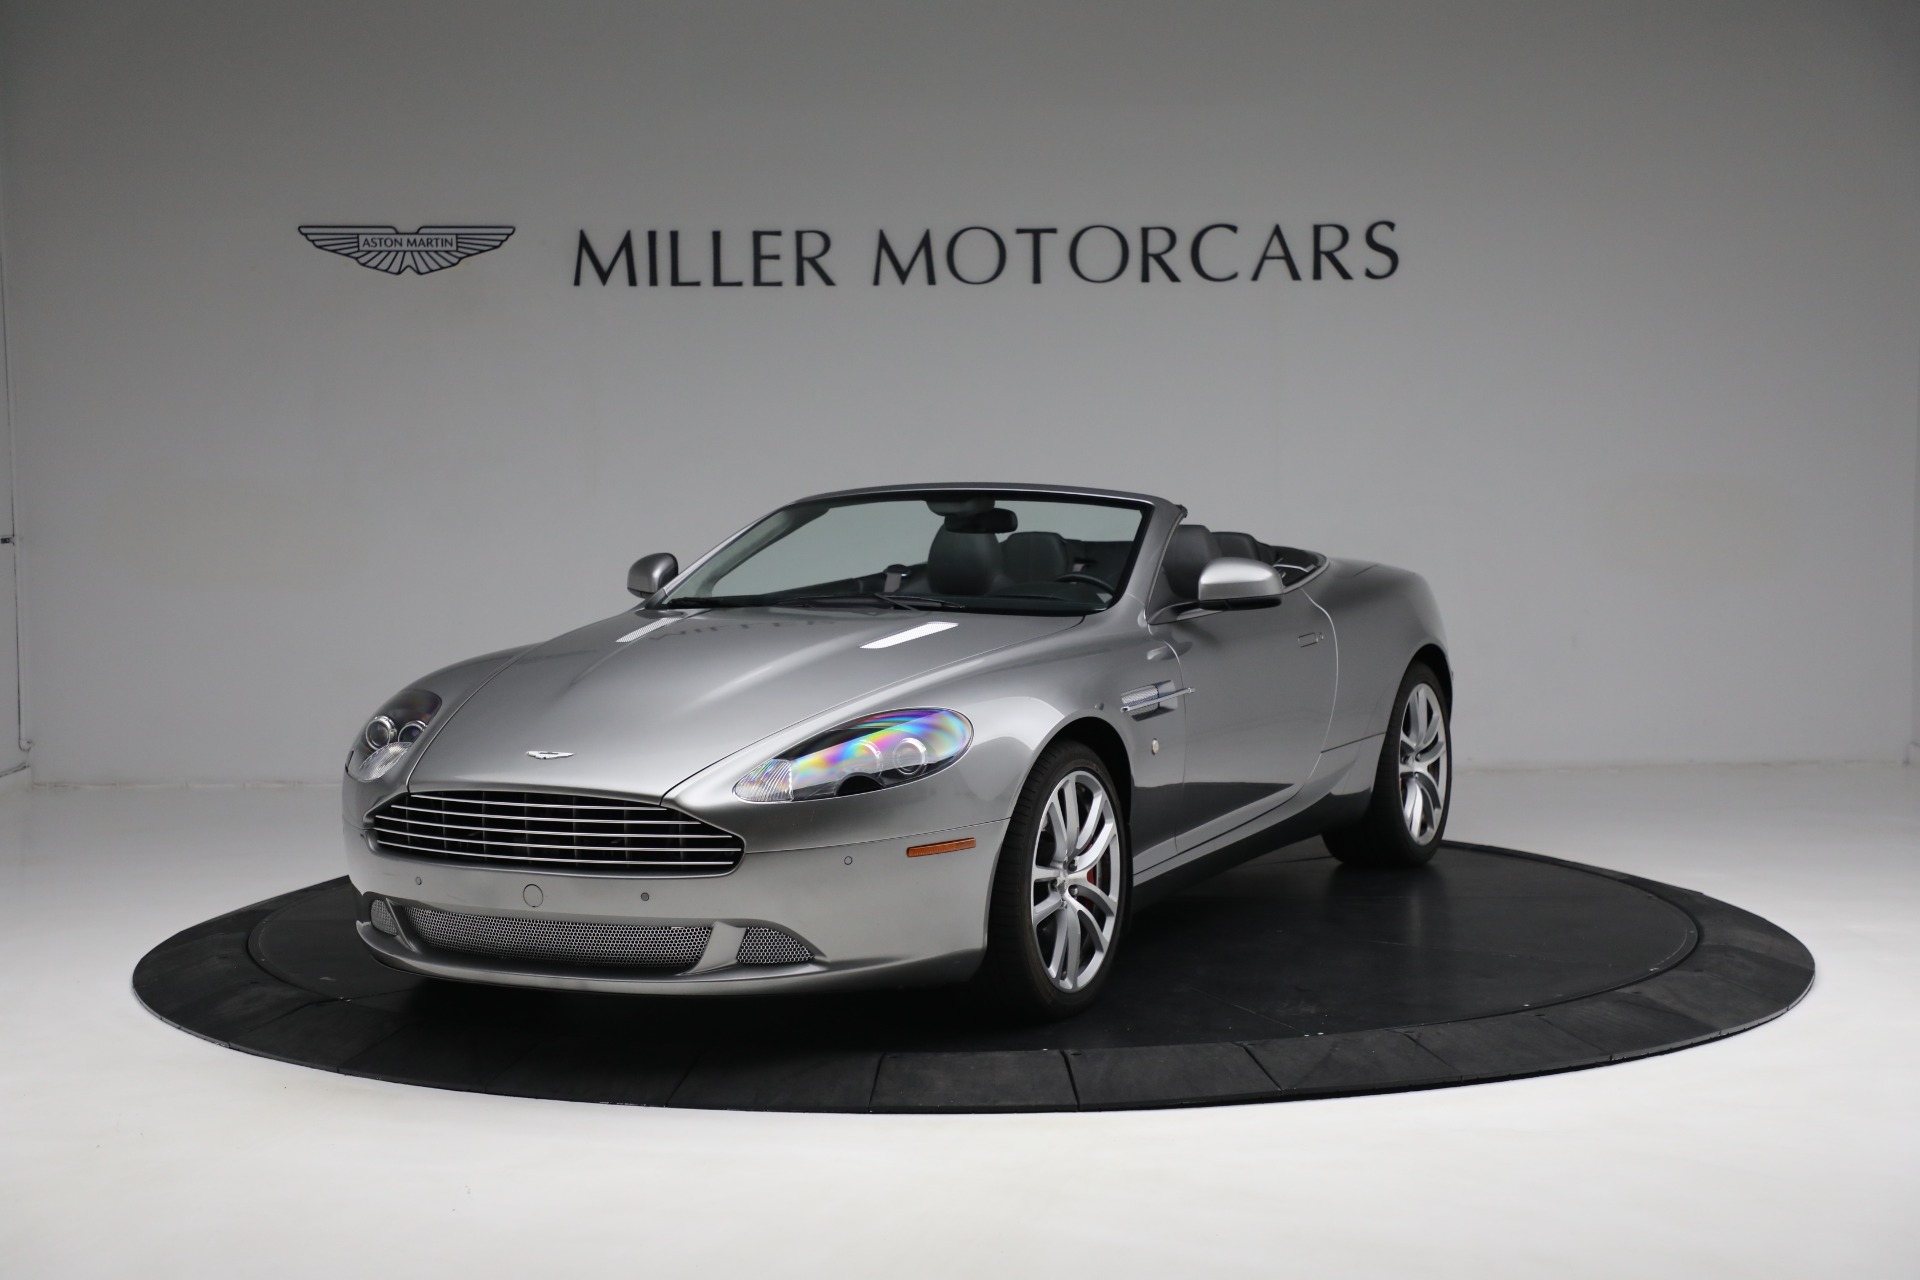 Used 2011 Aston Martin DB9 Volante for sale Sold at Maserati of Westport in Westport CT 06880 1